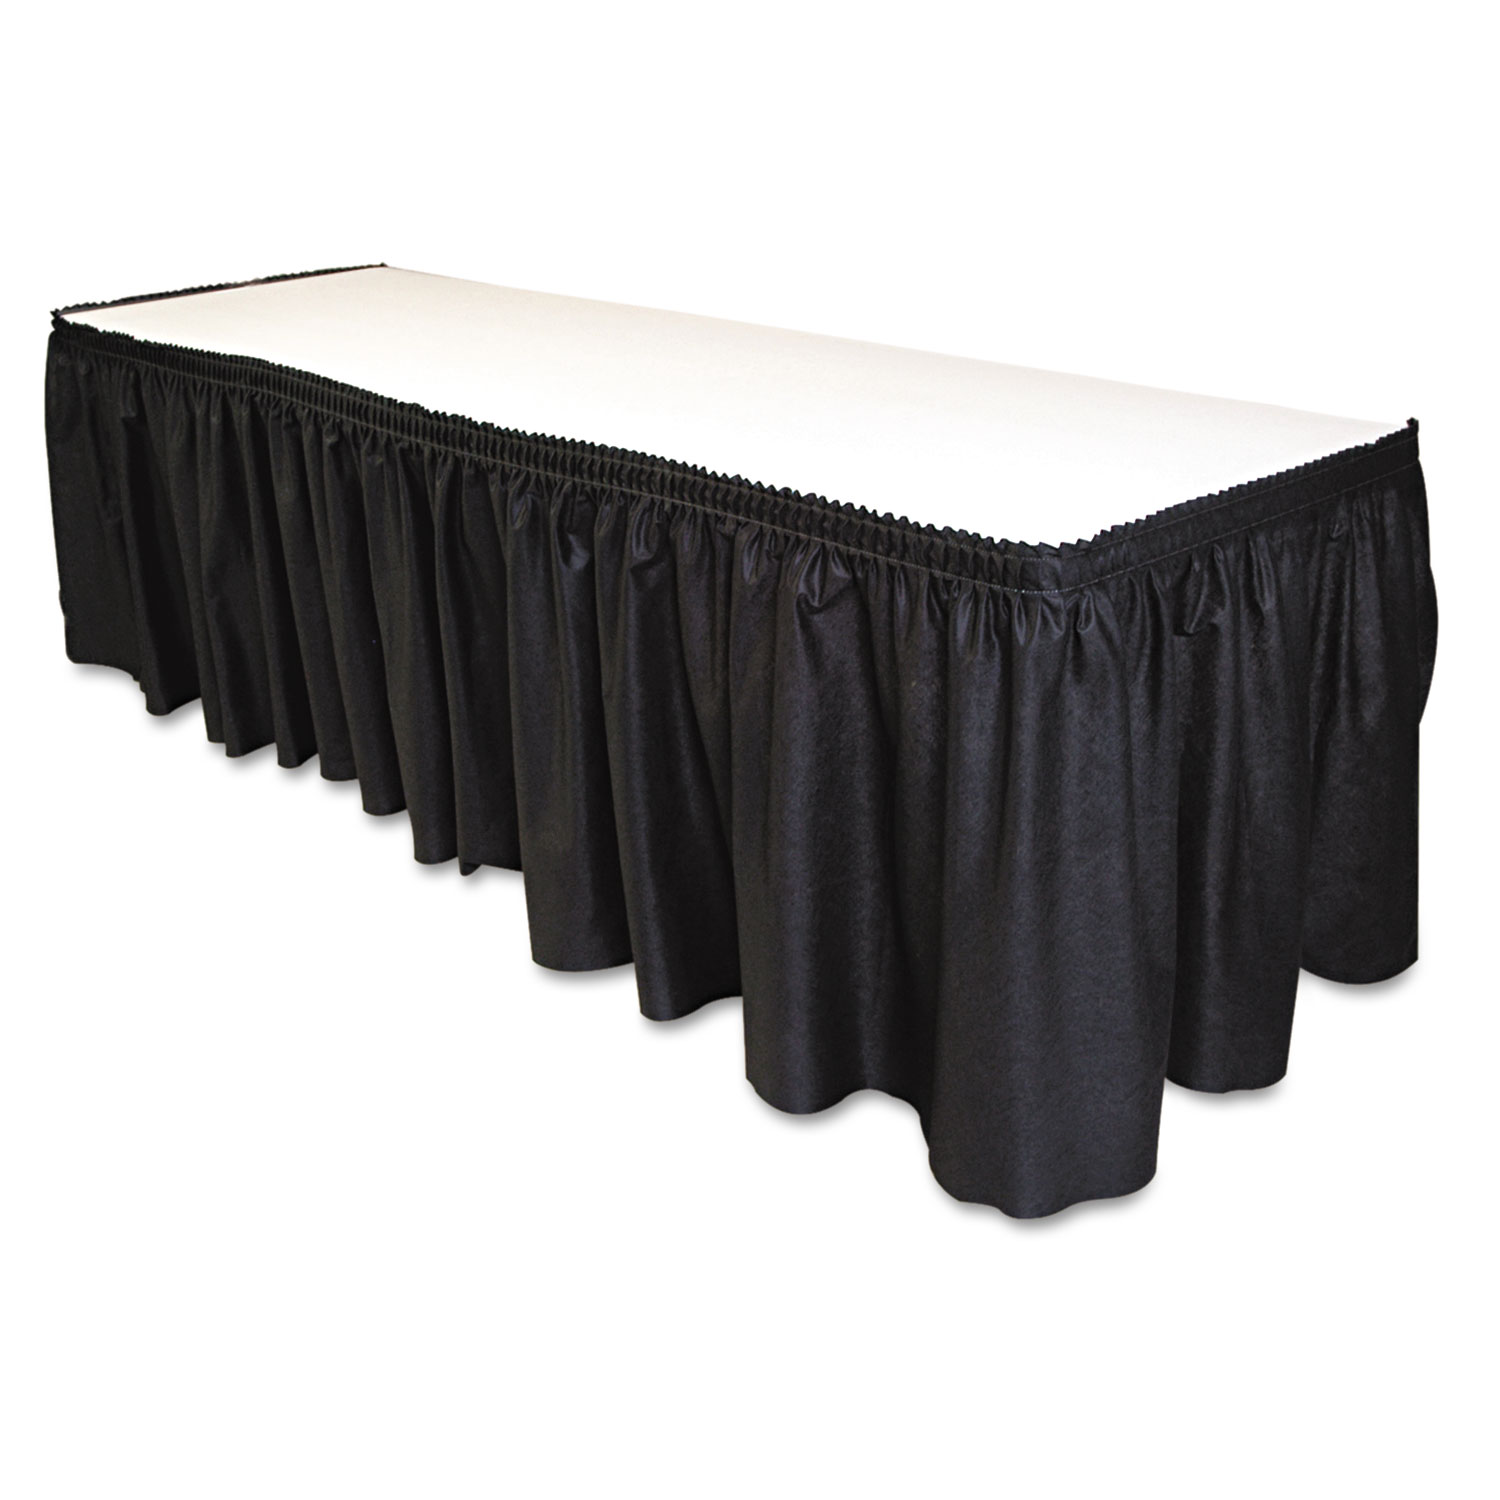 Tablemate Table Set Linen-Like Table Skirting, 29" x 14ft, Black - image 1 of 8